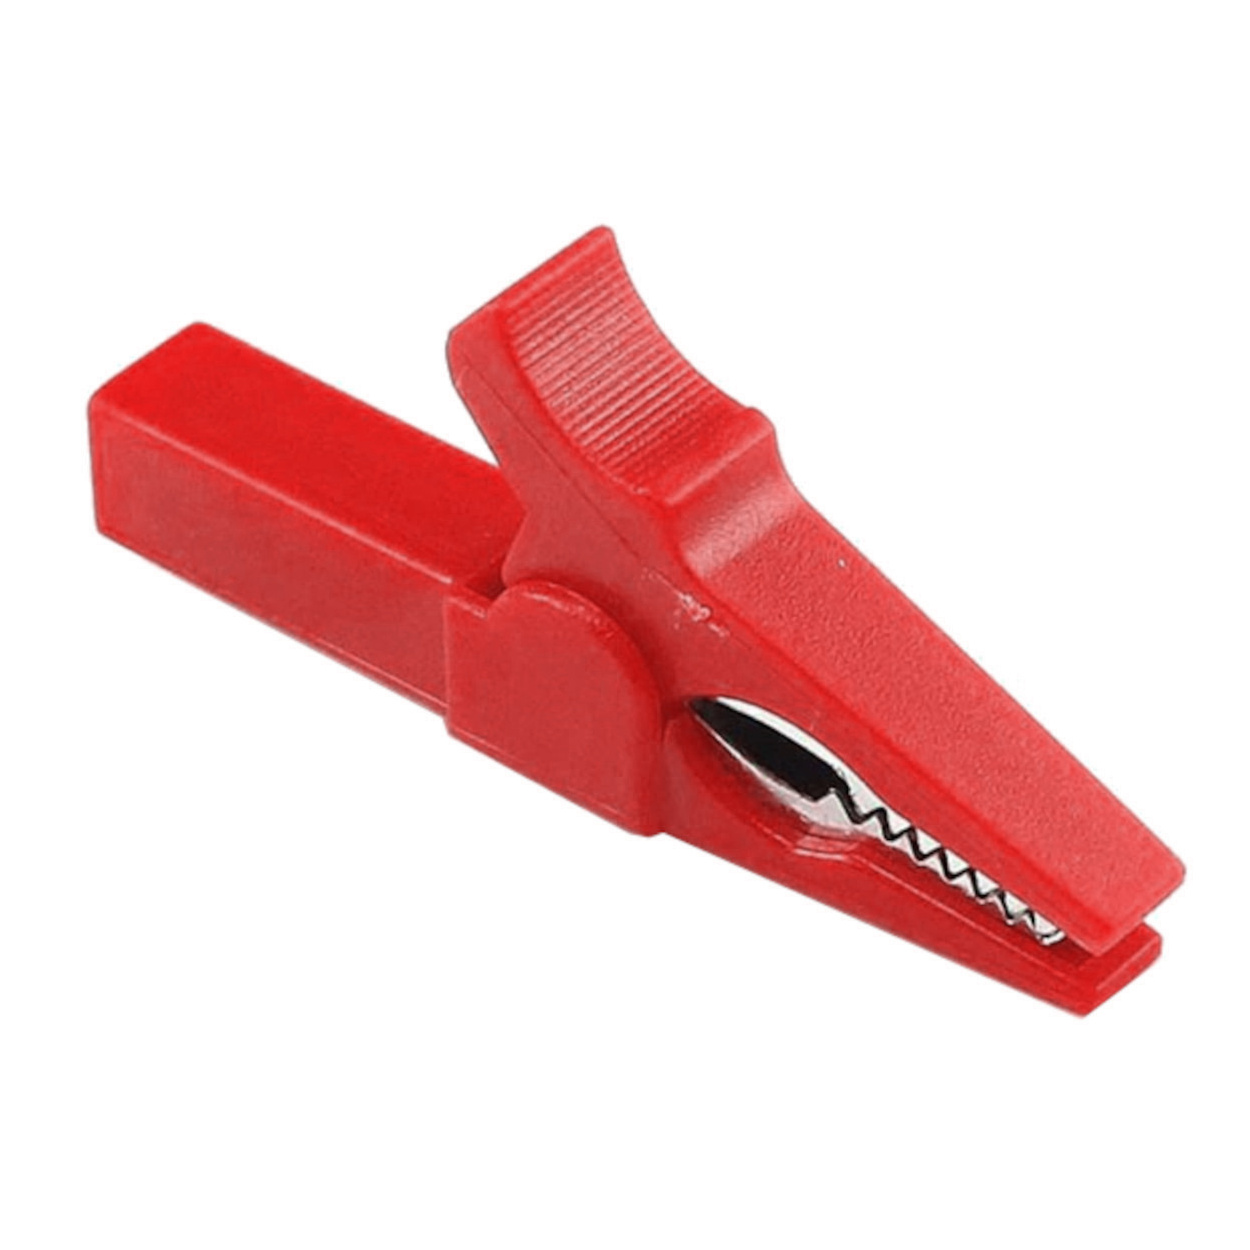 Probots Alligator Clip Red 55mm Copper Insulated Crocodile Opening 10mm for  Banana Plug 4mm Buy Online India